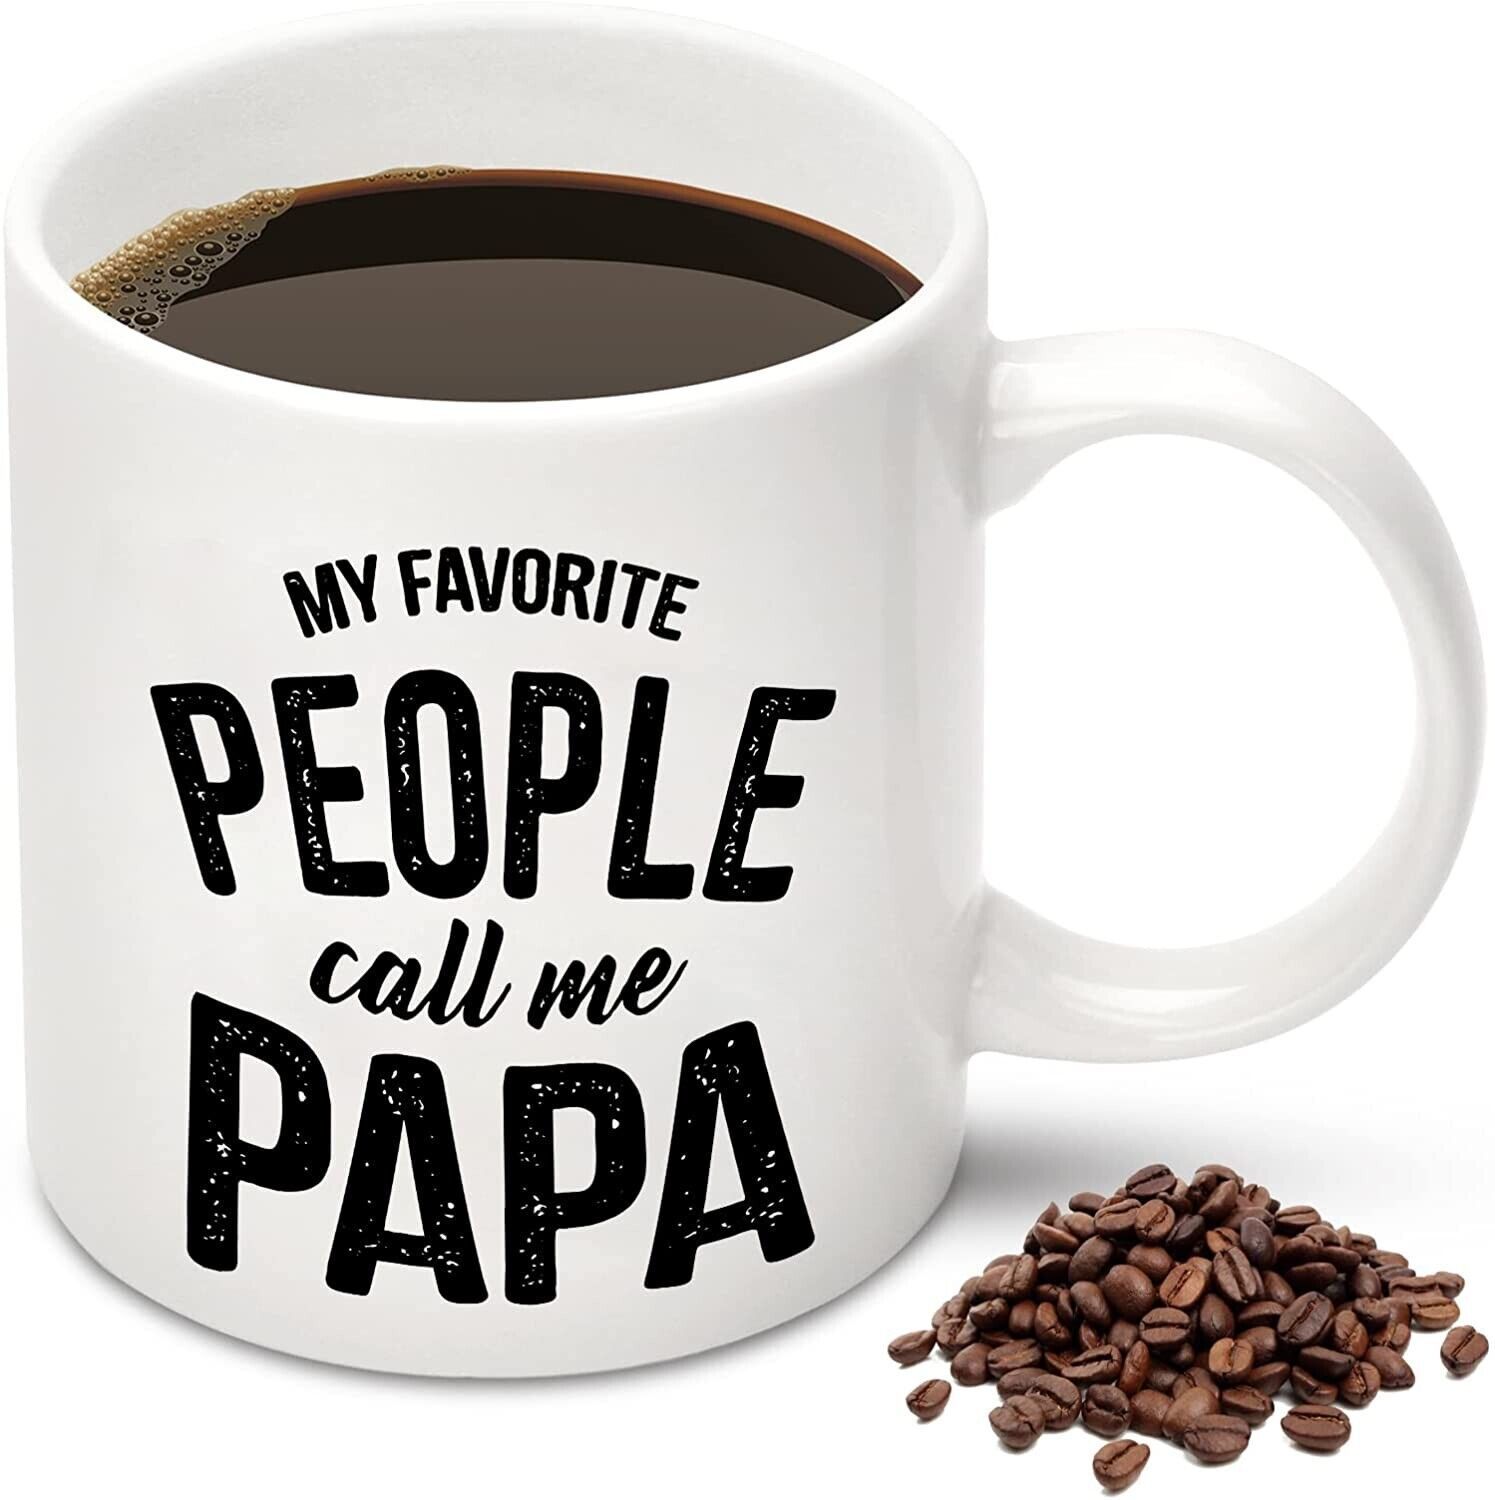 Primary image for 11 OZ Novelty Coffee Mug  "MY FAVORITE  PEOPLE CALL ME PAPA" NEW